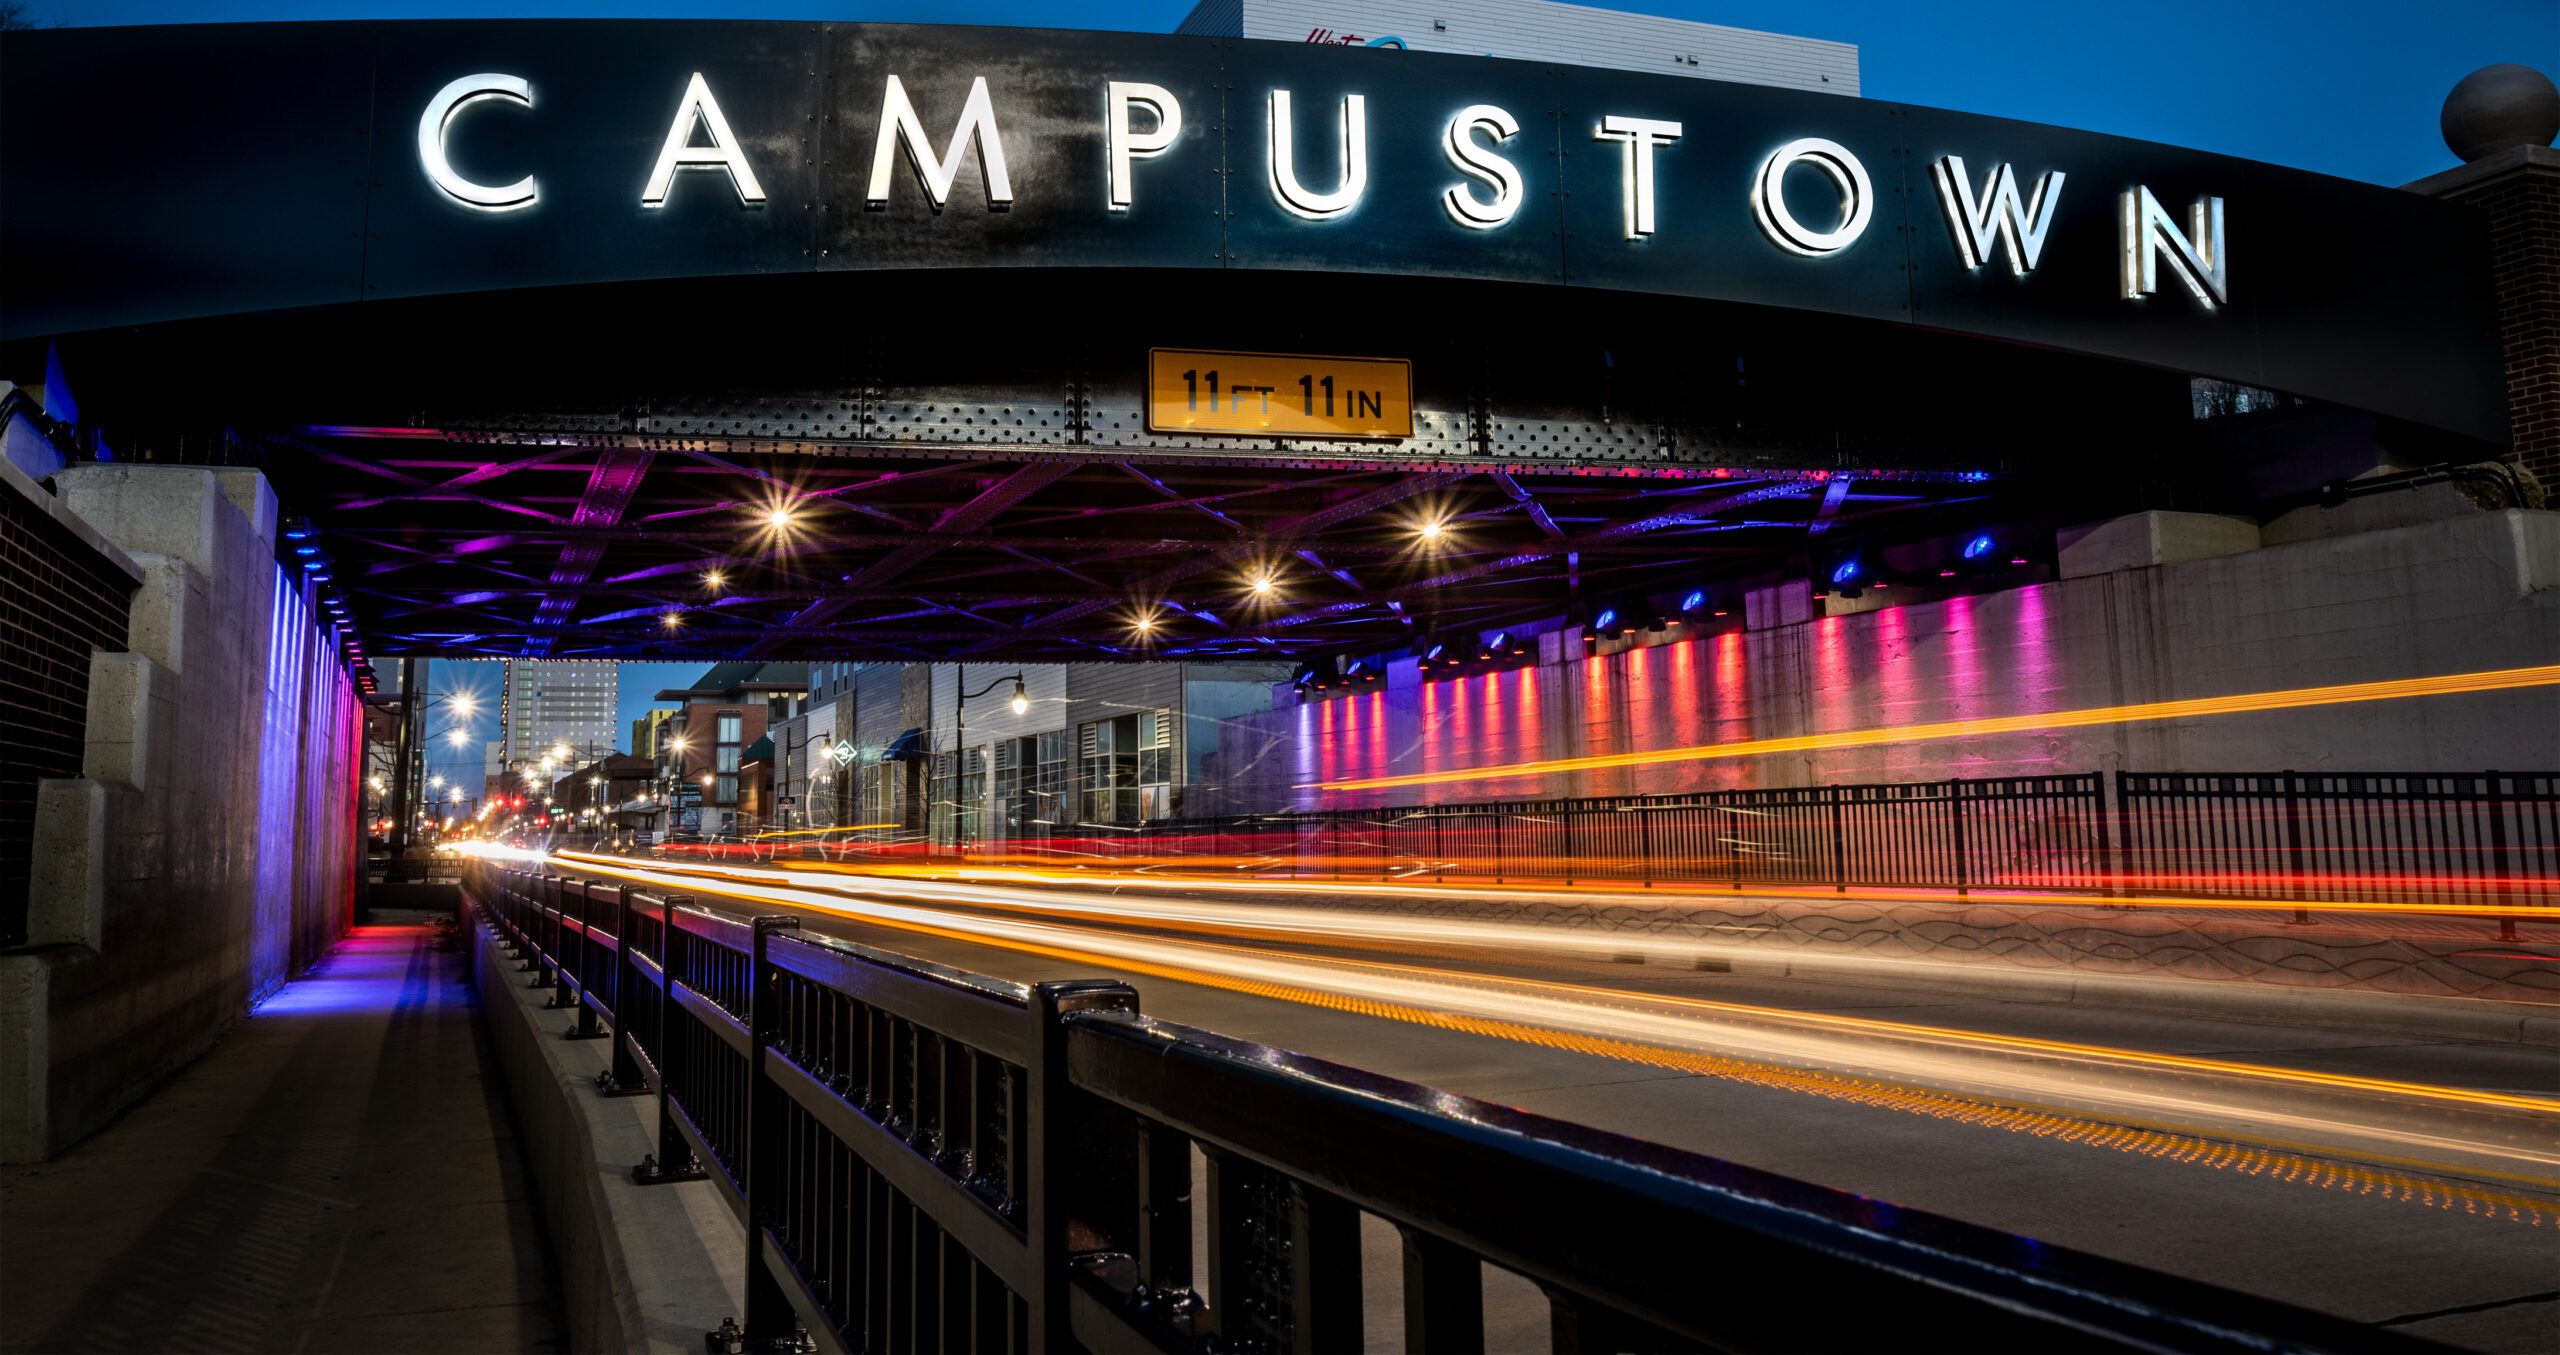 Black bridge with 'campustown' sign, neon lights, a road, and a black fence